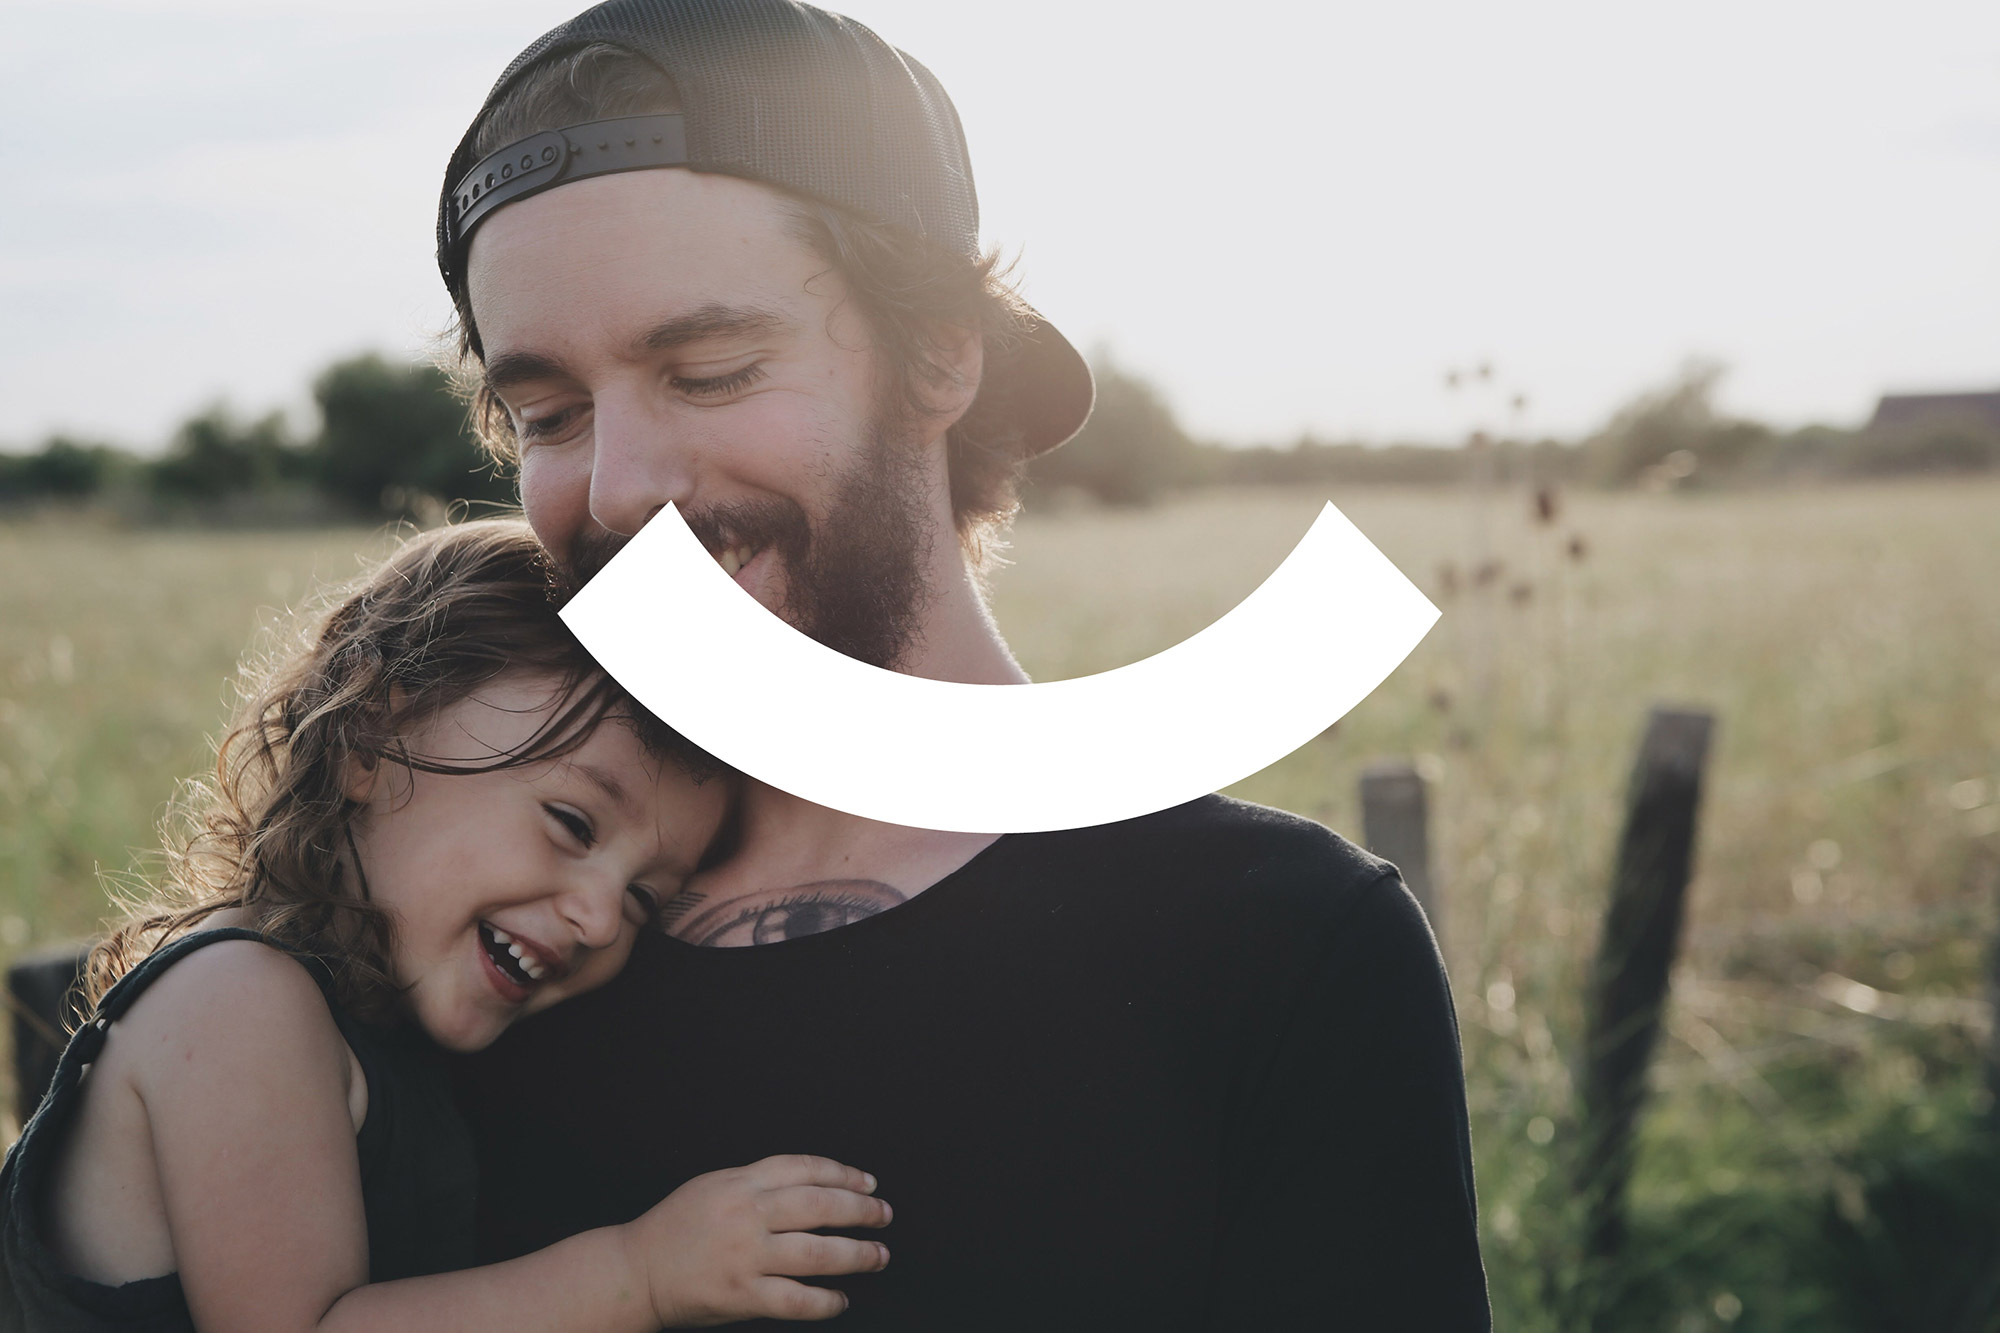 white Oberbillwerder logo on photograph of a father holding his little daughter in his arms. Both are smiling and standing in a green meadow landscape on a warm summer day.